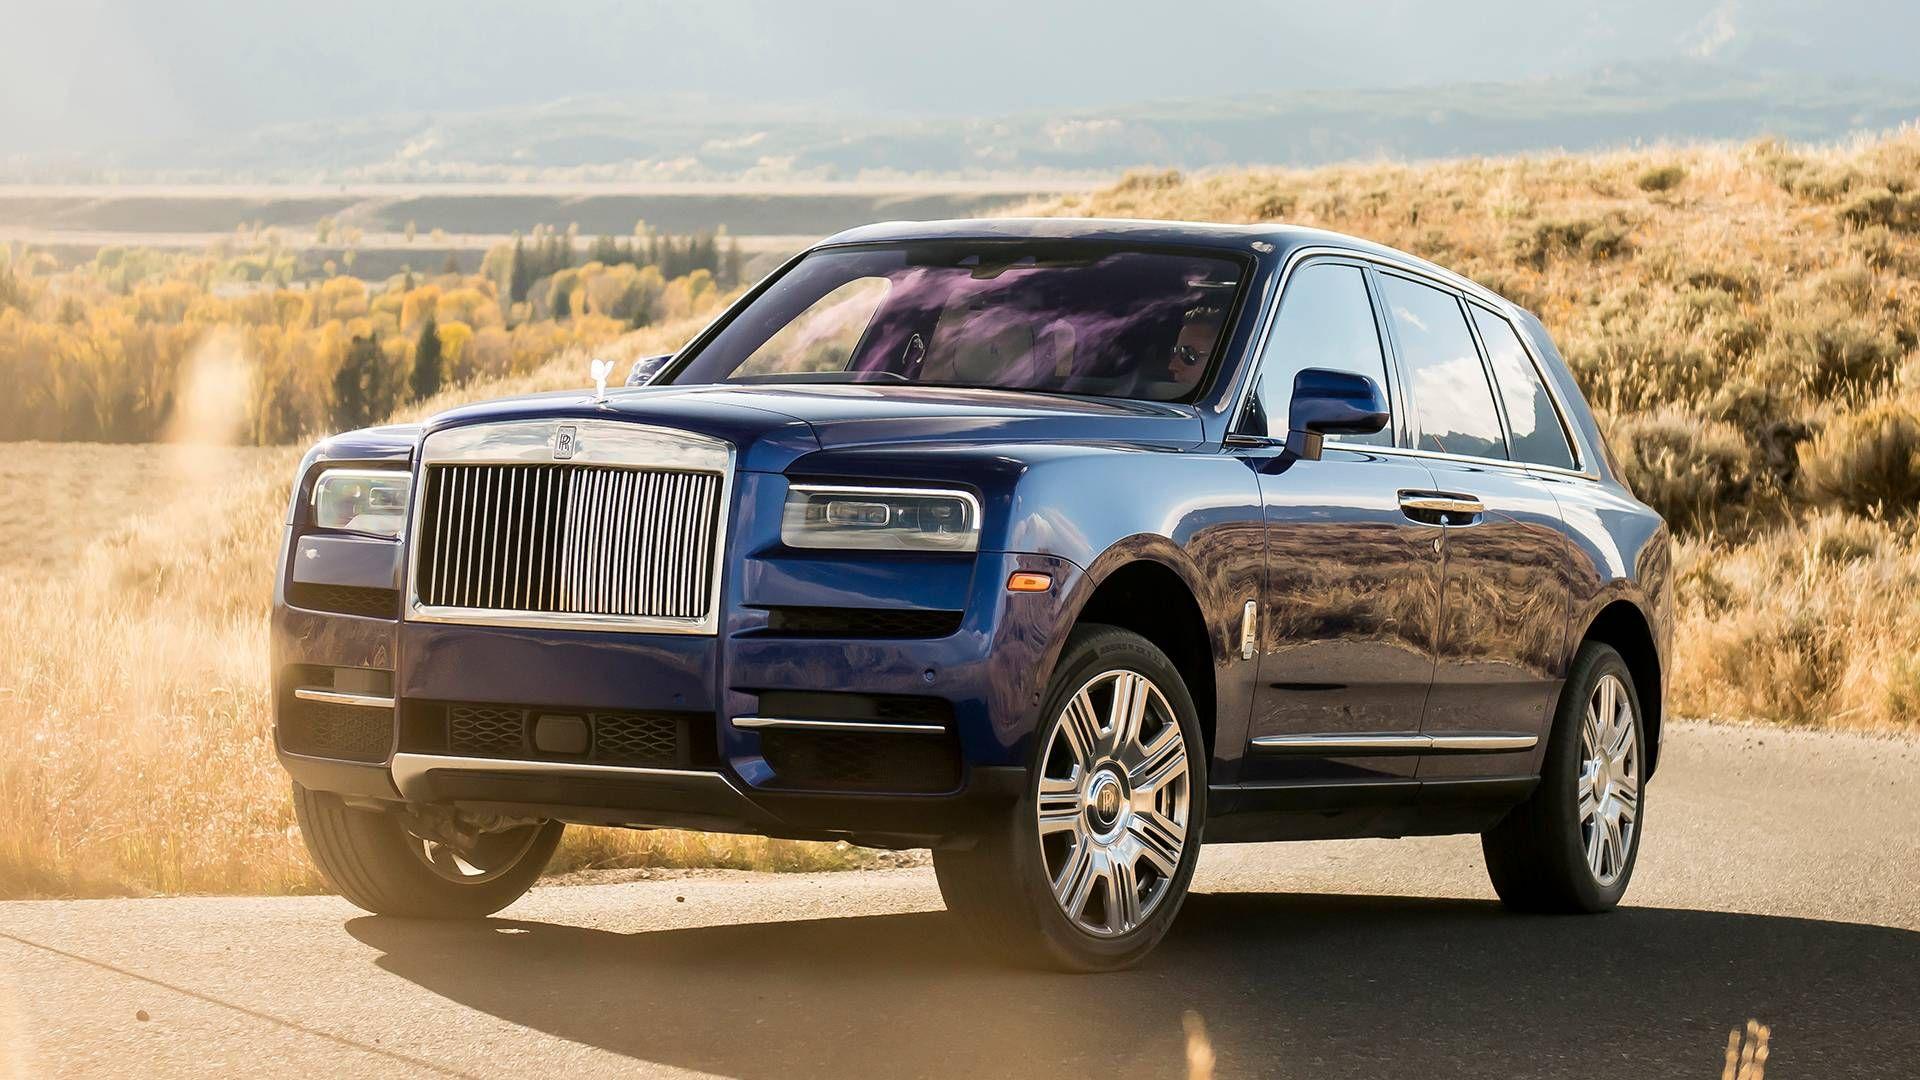 Rolls Royce Cullinan Black Badge Planned With More Than 563 Bhp?